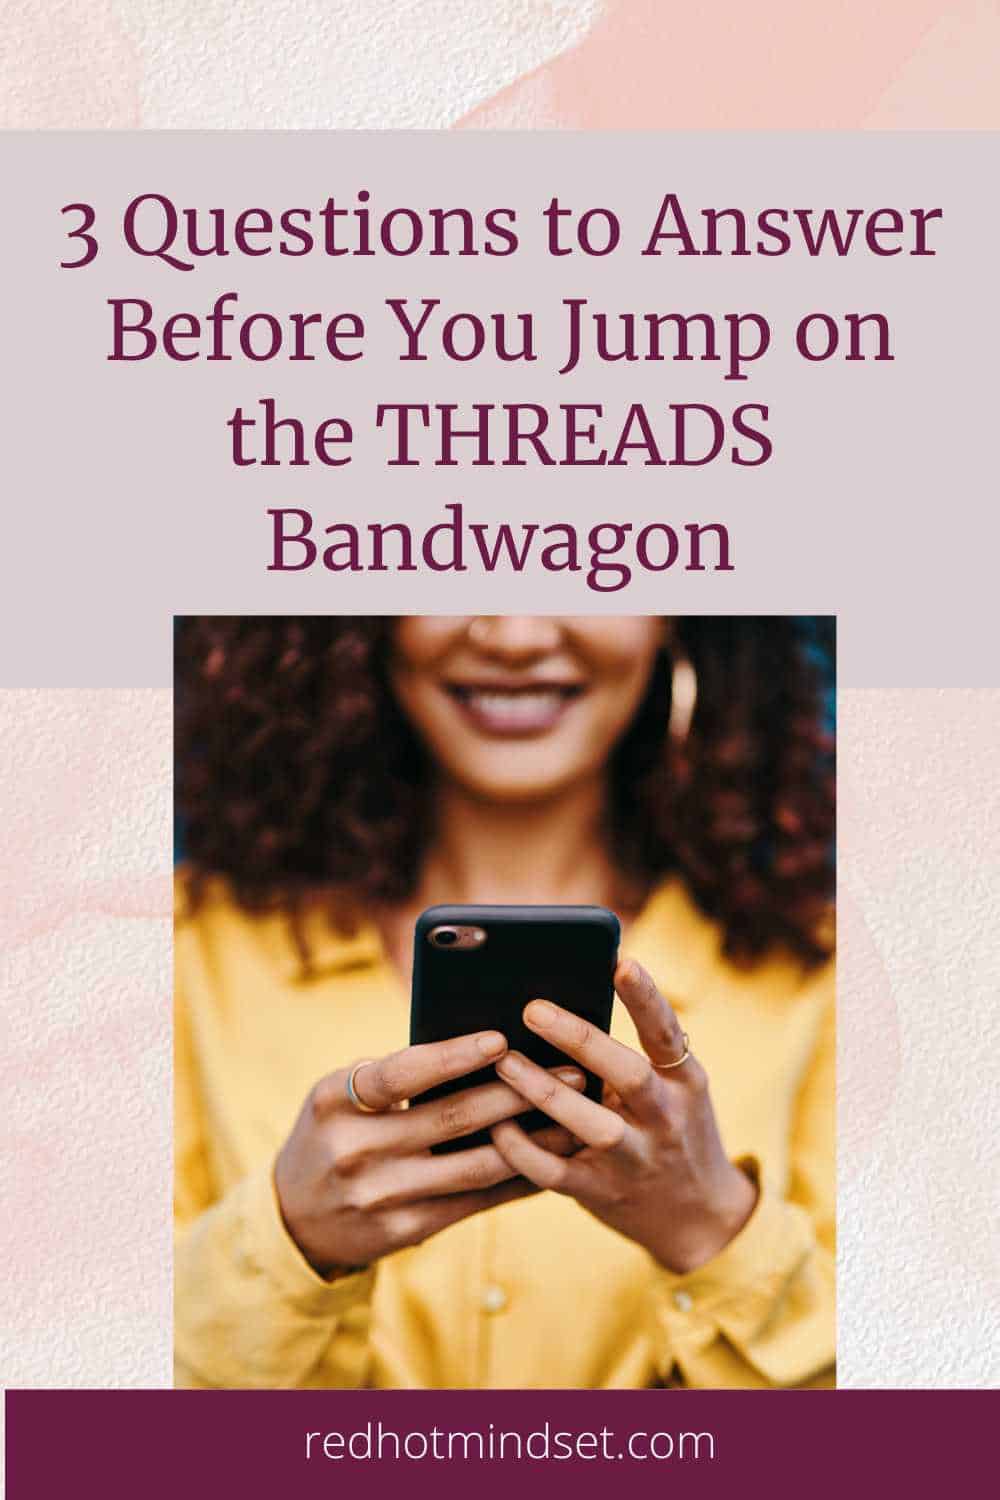 Ep 199 | Why I’m NOT Jumping on the THREADS Bandwagon – and 3 Questions to Answer Before You Do